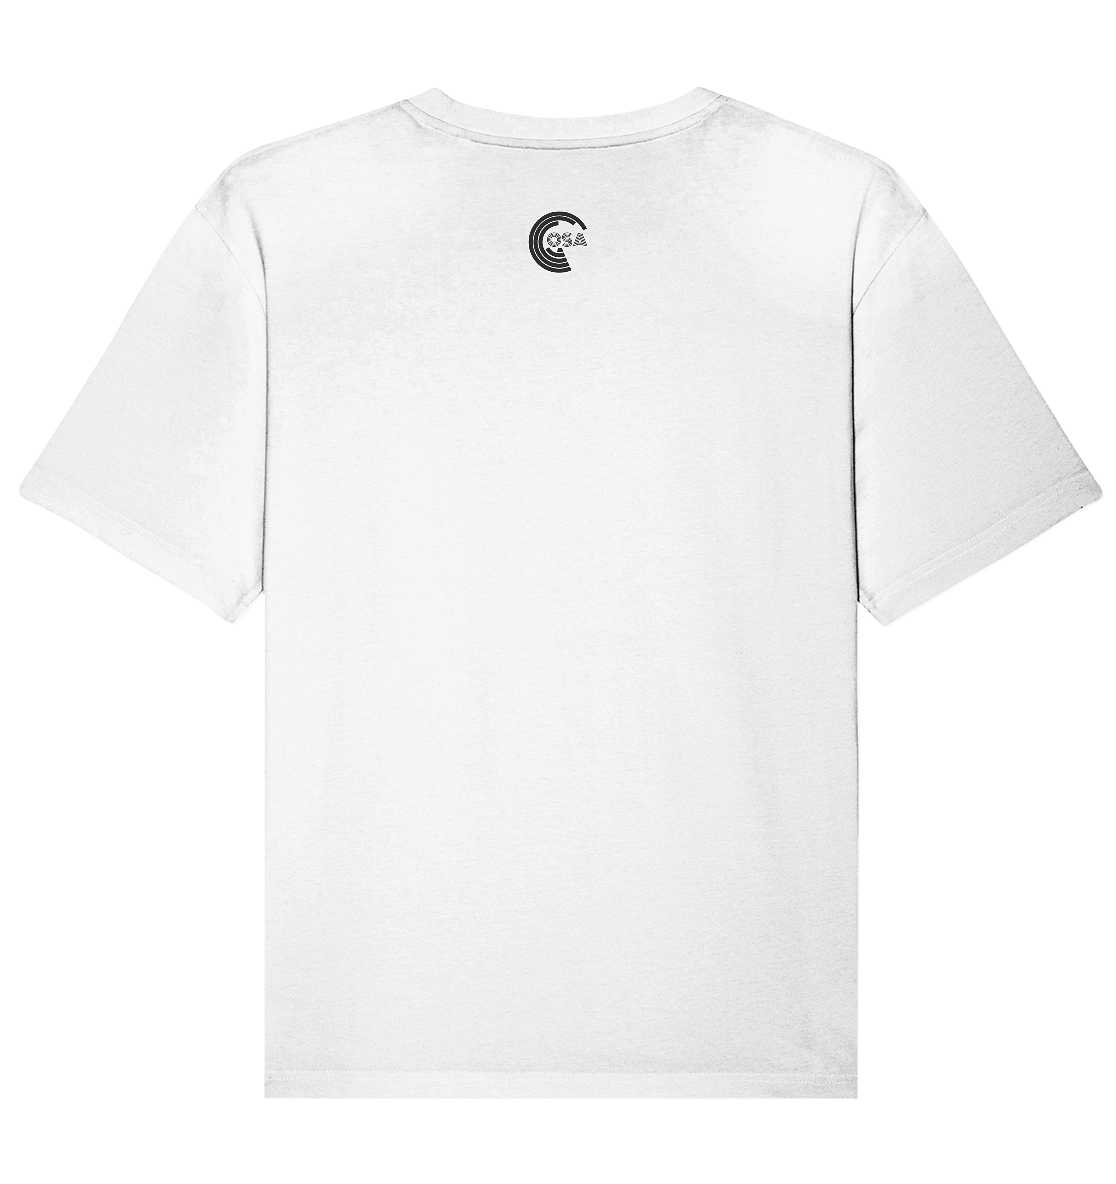 OSA - T shirt casual "Grow in harmony with your body" - Organic Relaxed Shirt